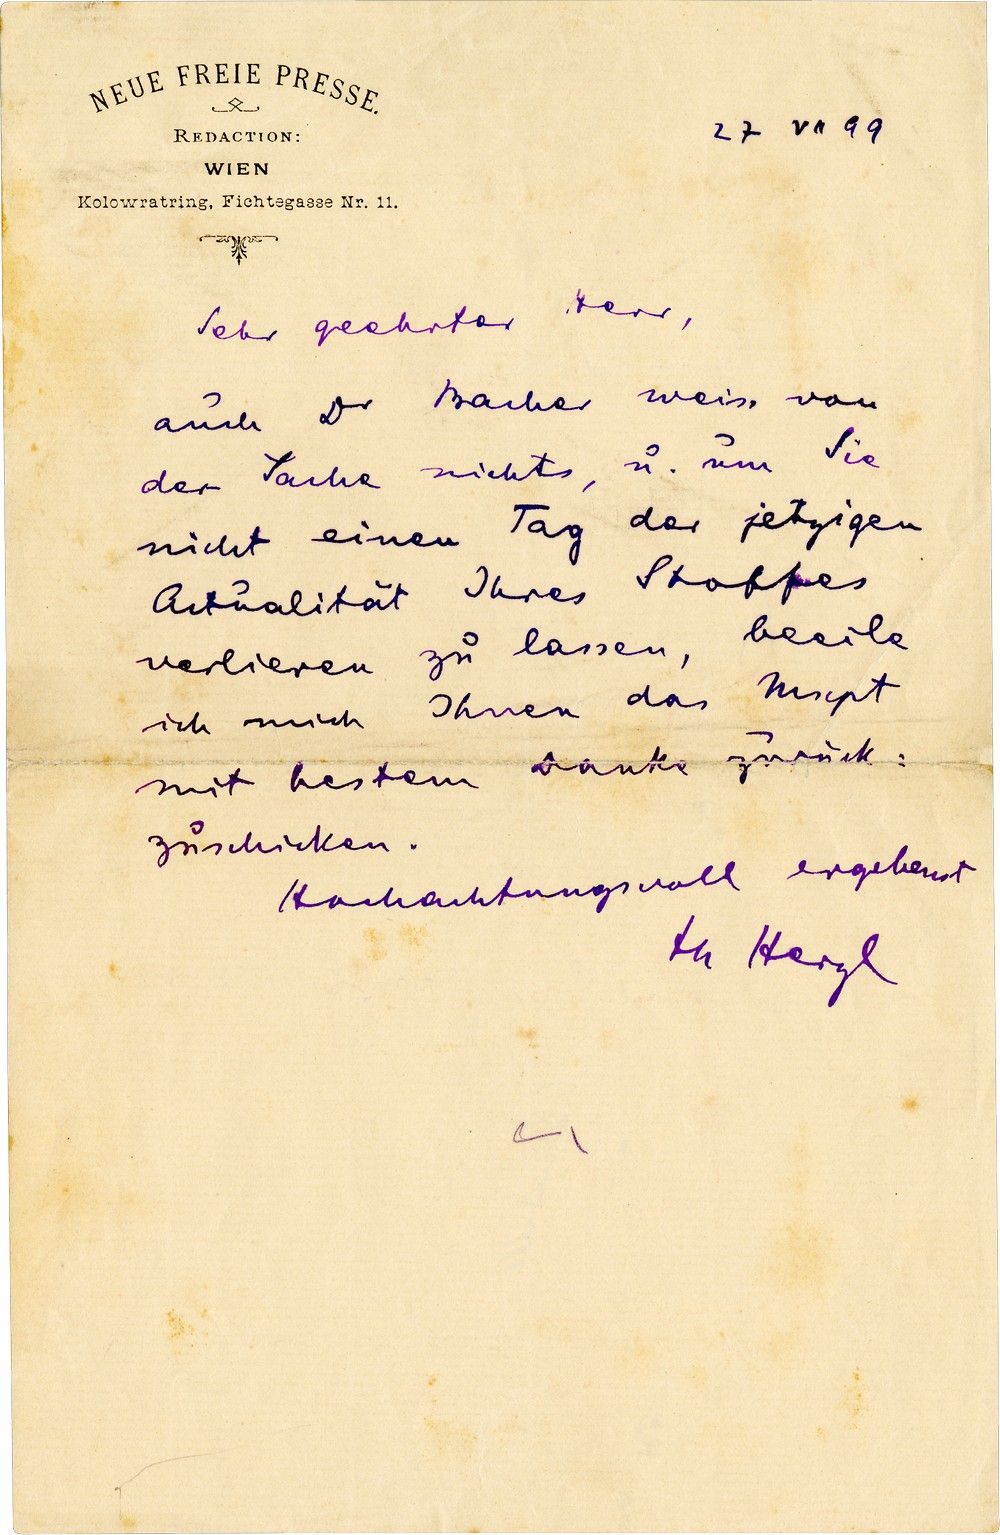 Theodor Herzl Writes of a Matter Unknown, He Says, Even to His Editor, Amidst the Dreyfus Affair